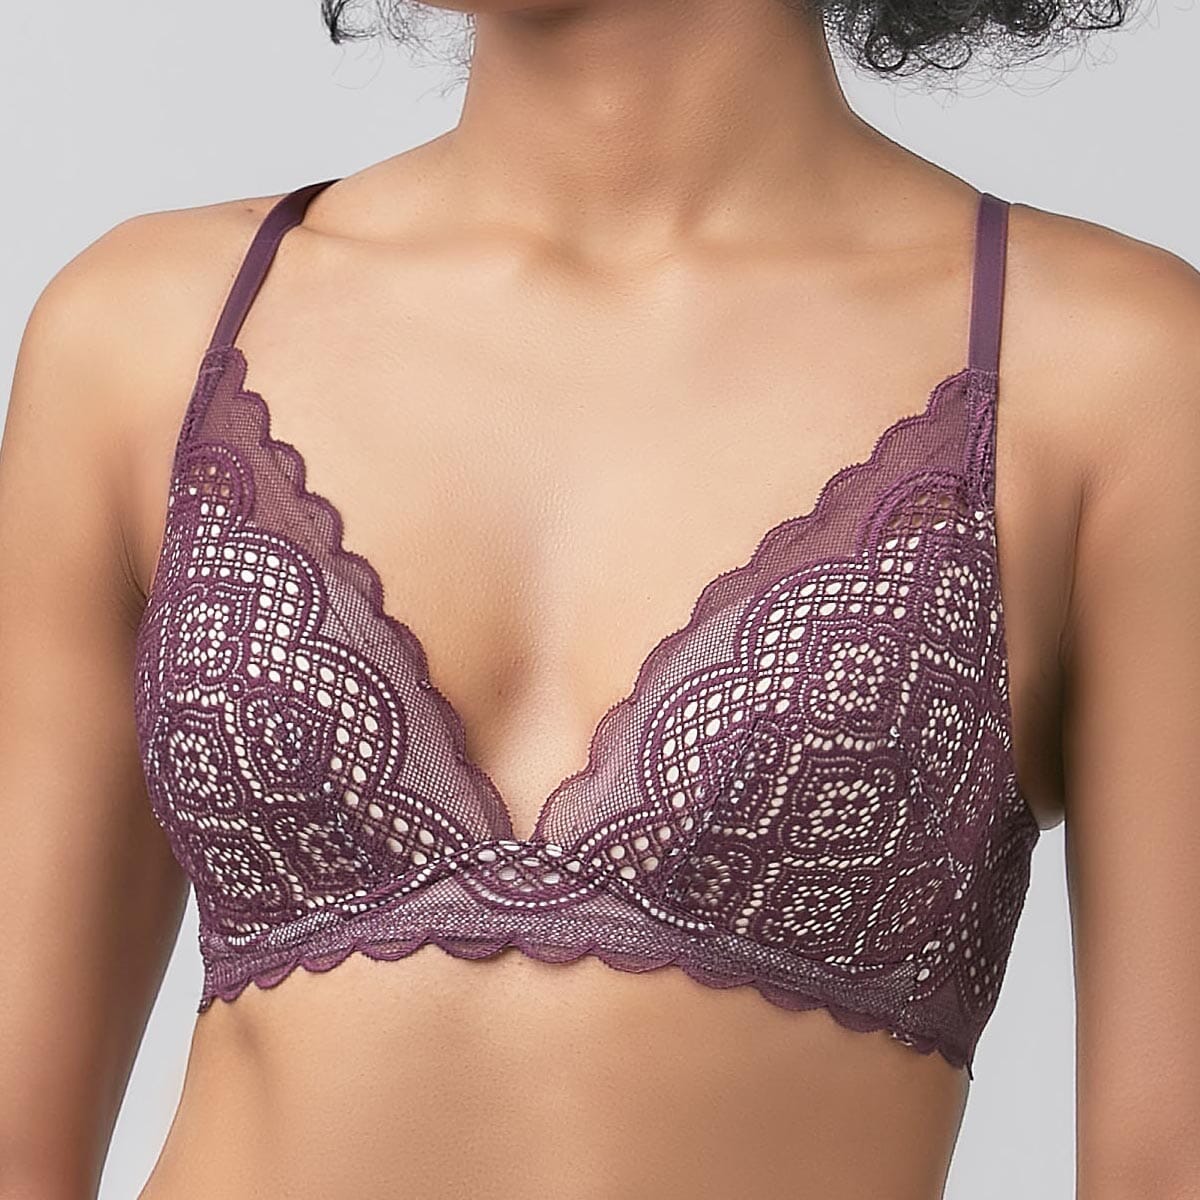 Solution Non Wired Full Coverage Lace Bra Bra Her Own Words Blackberry Wine x Champagne 70B 